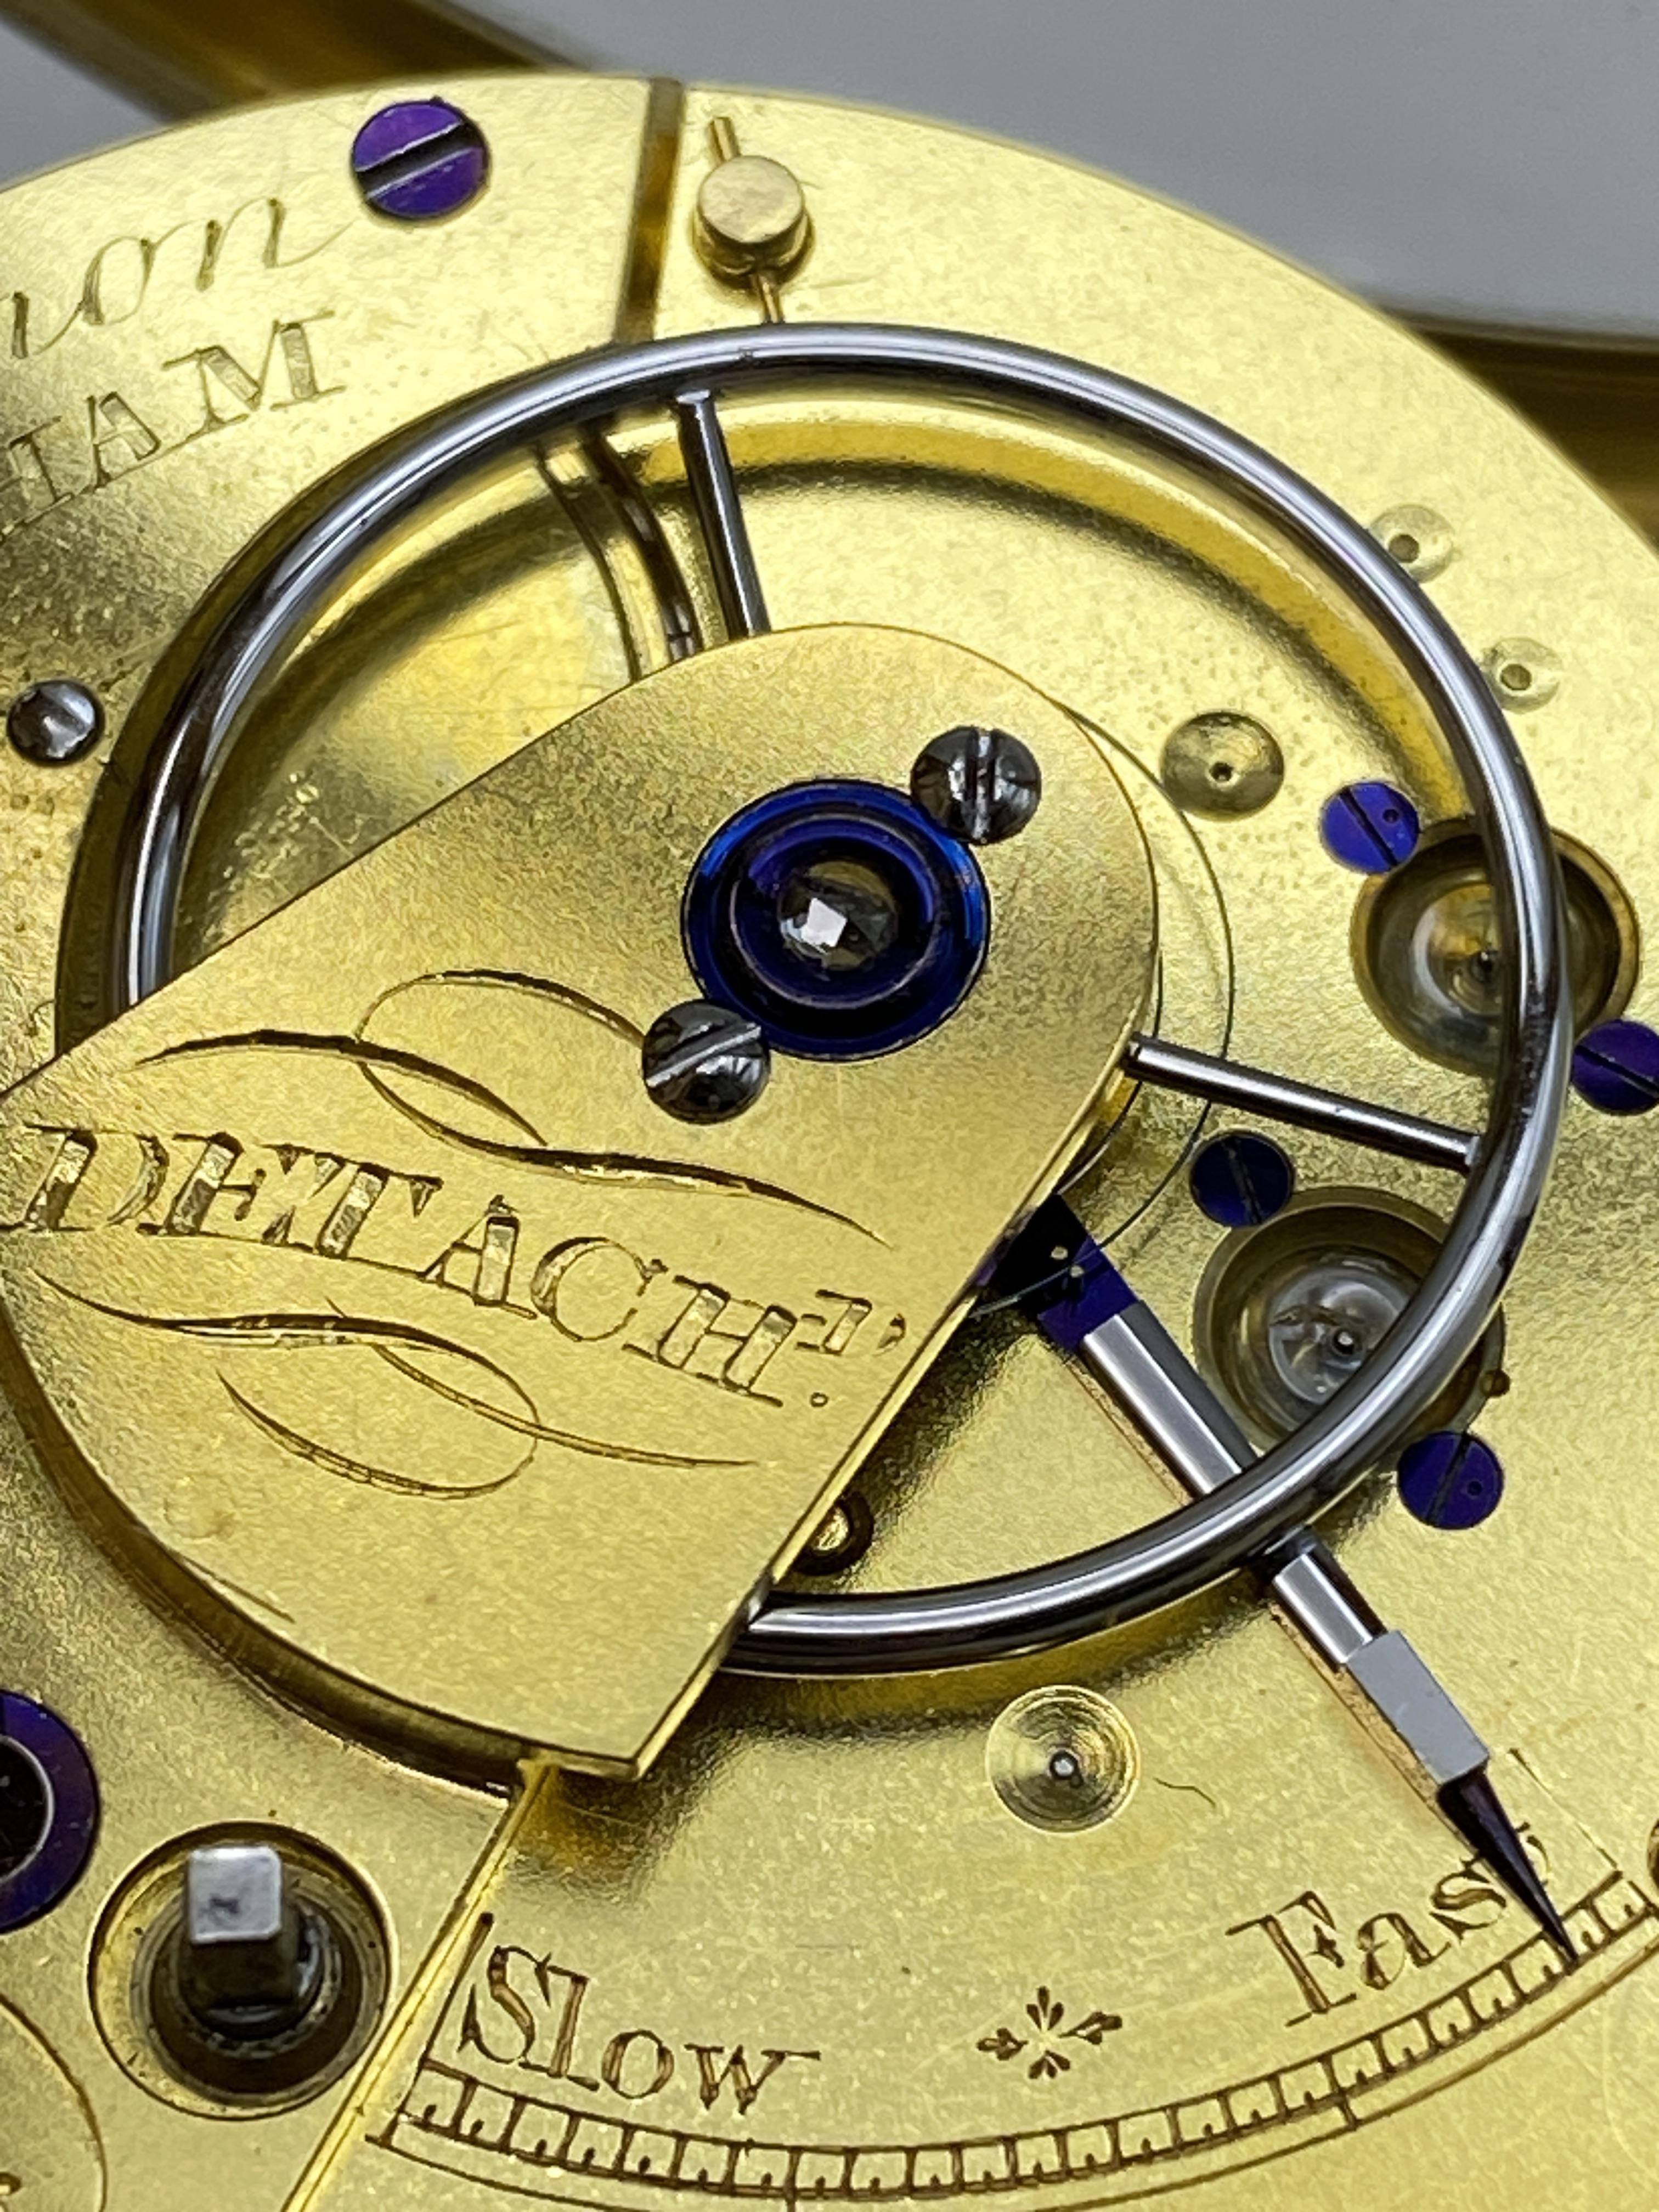 18ct Gold Fusee Pocket Watch by Gammon of Birmingham '1685', No.3584. - Image 33 of 48